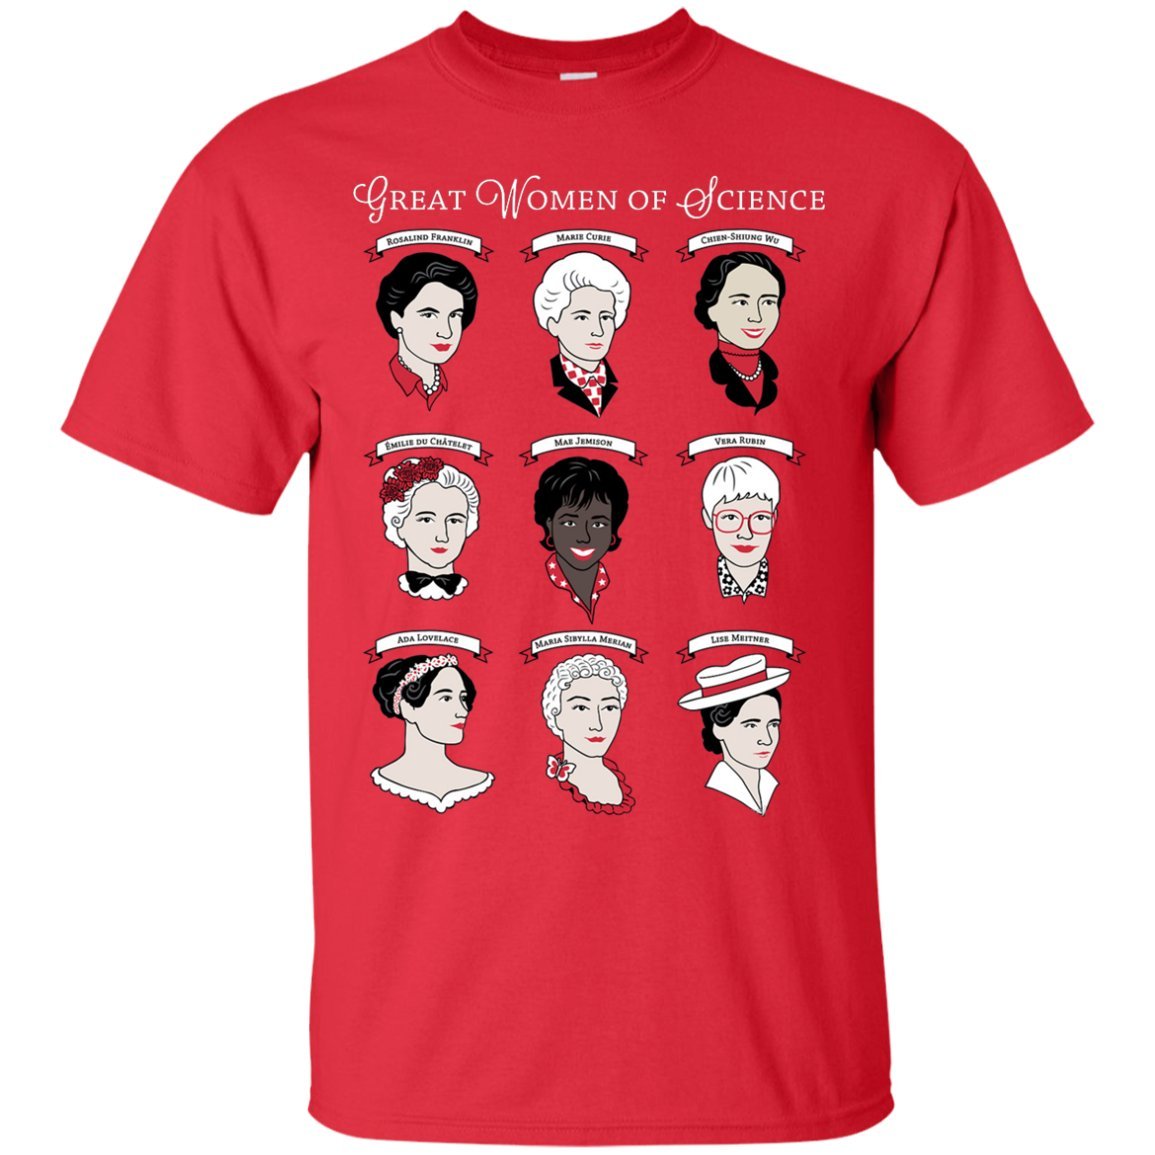 Great Women of Science T-shirt